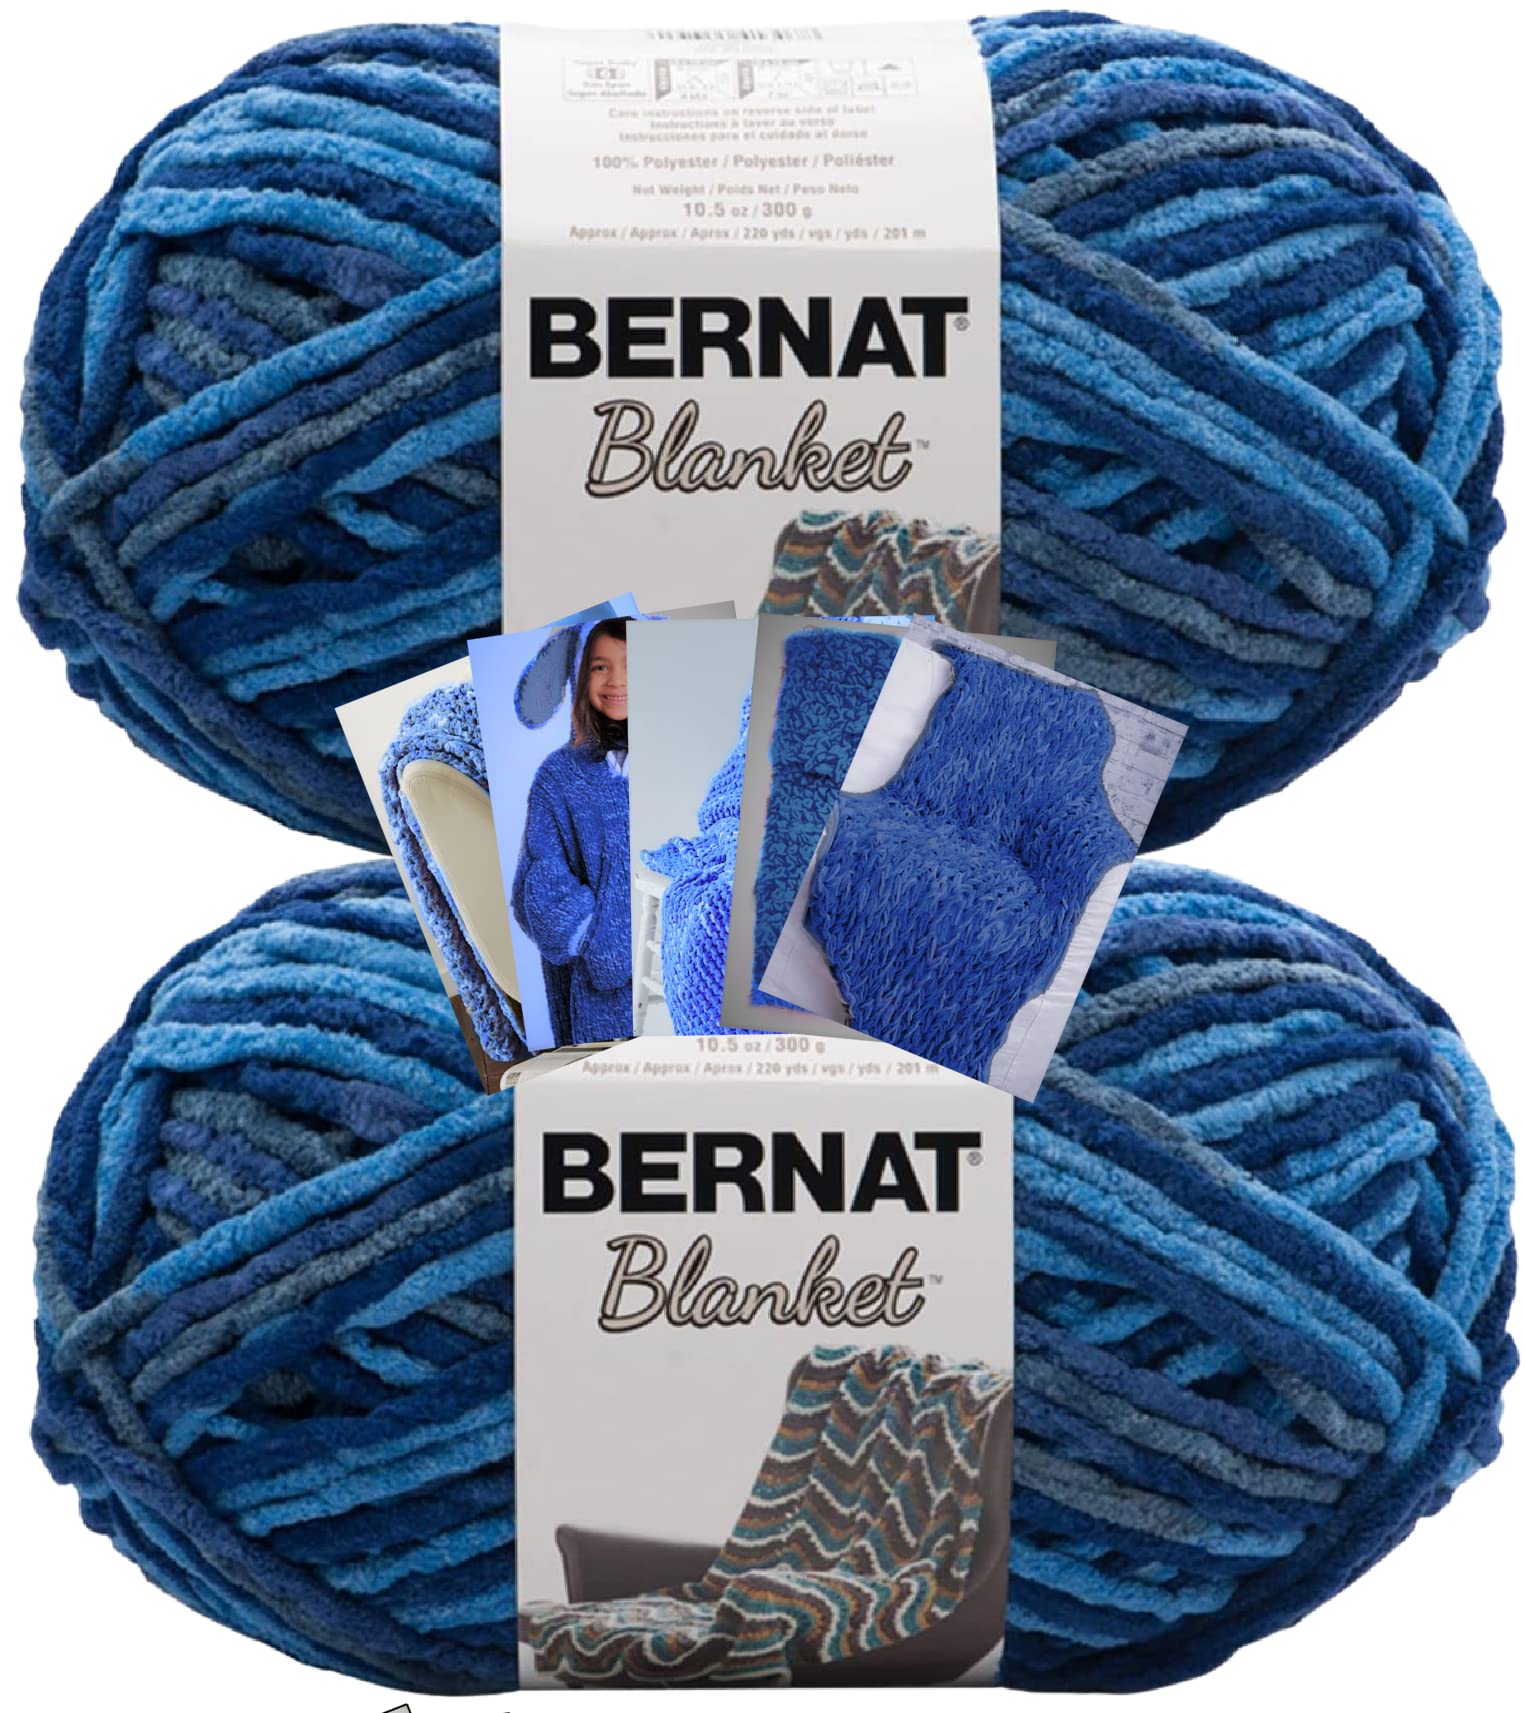 Bernat Blanket Yarn - Big Ball (10.5 oz) - 2 Pack with Pattern Cards in Color (North Sea)  - Like New